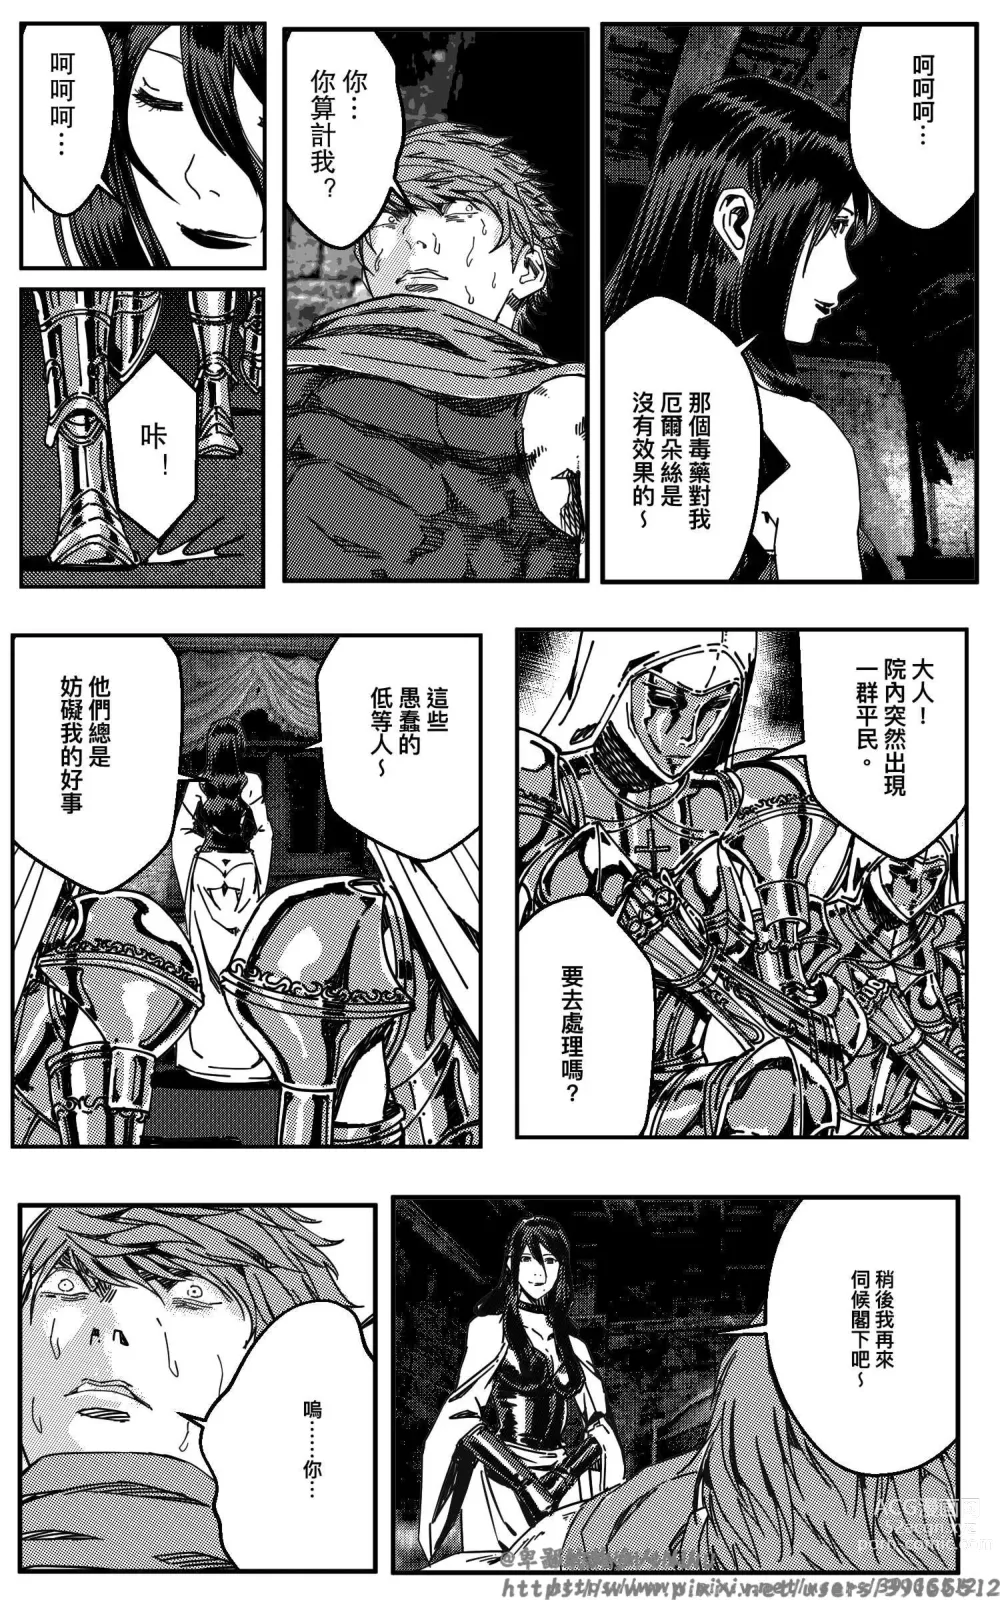 Page 16 of doujinshi 铁处女Ironmaiden EP17-48